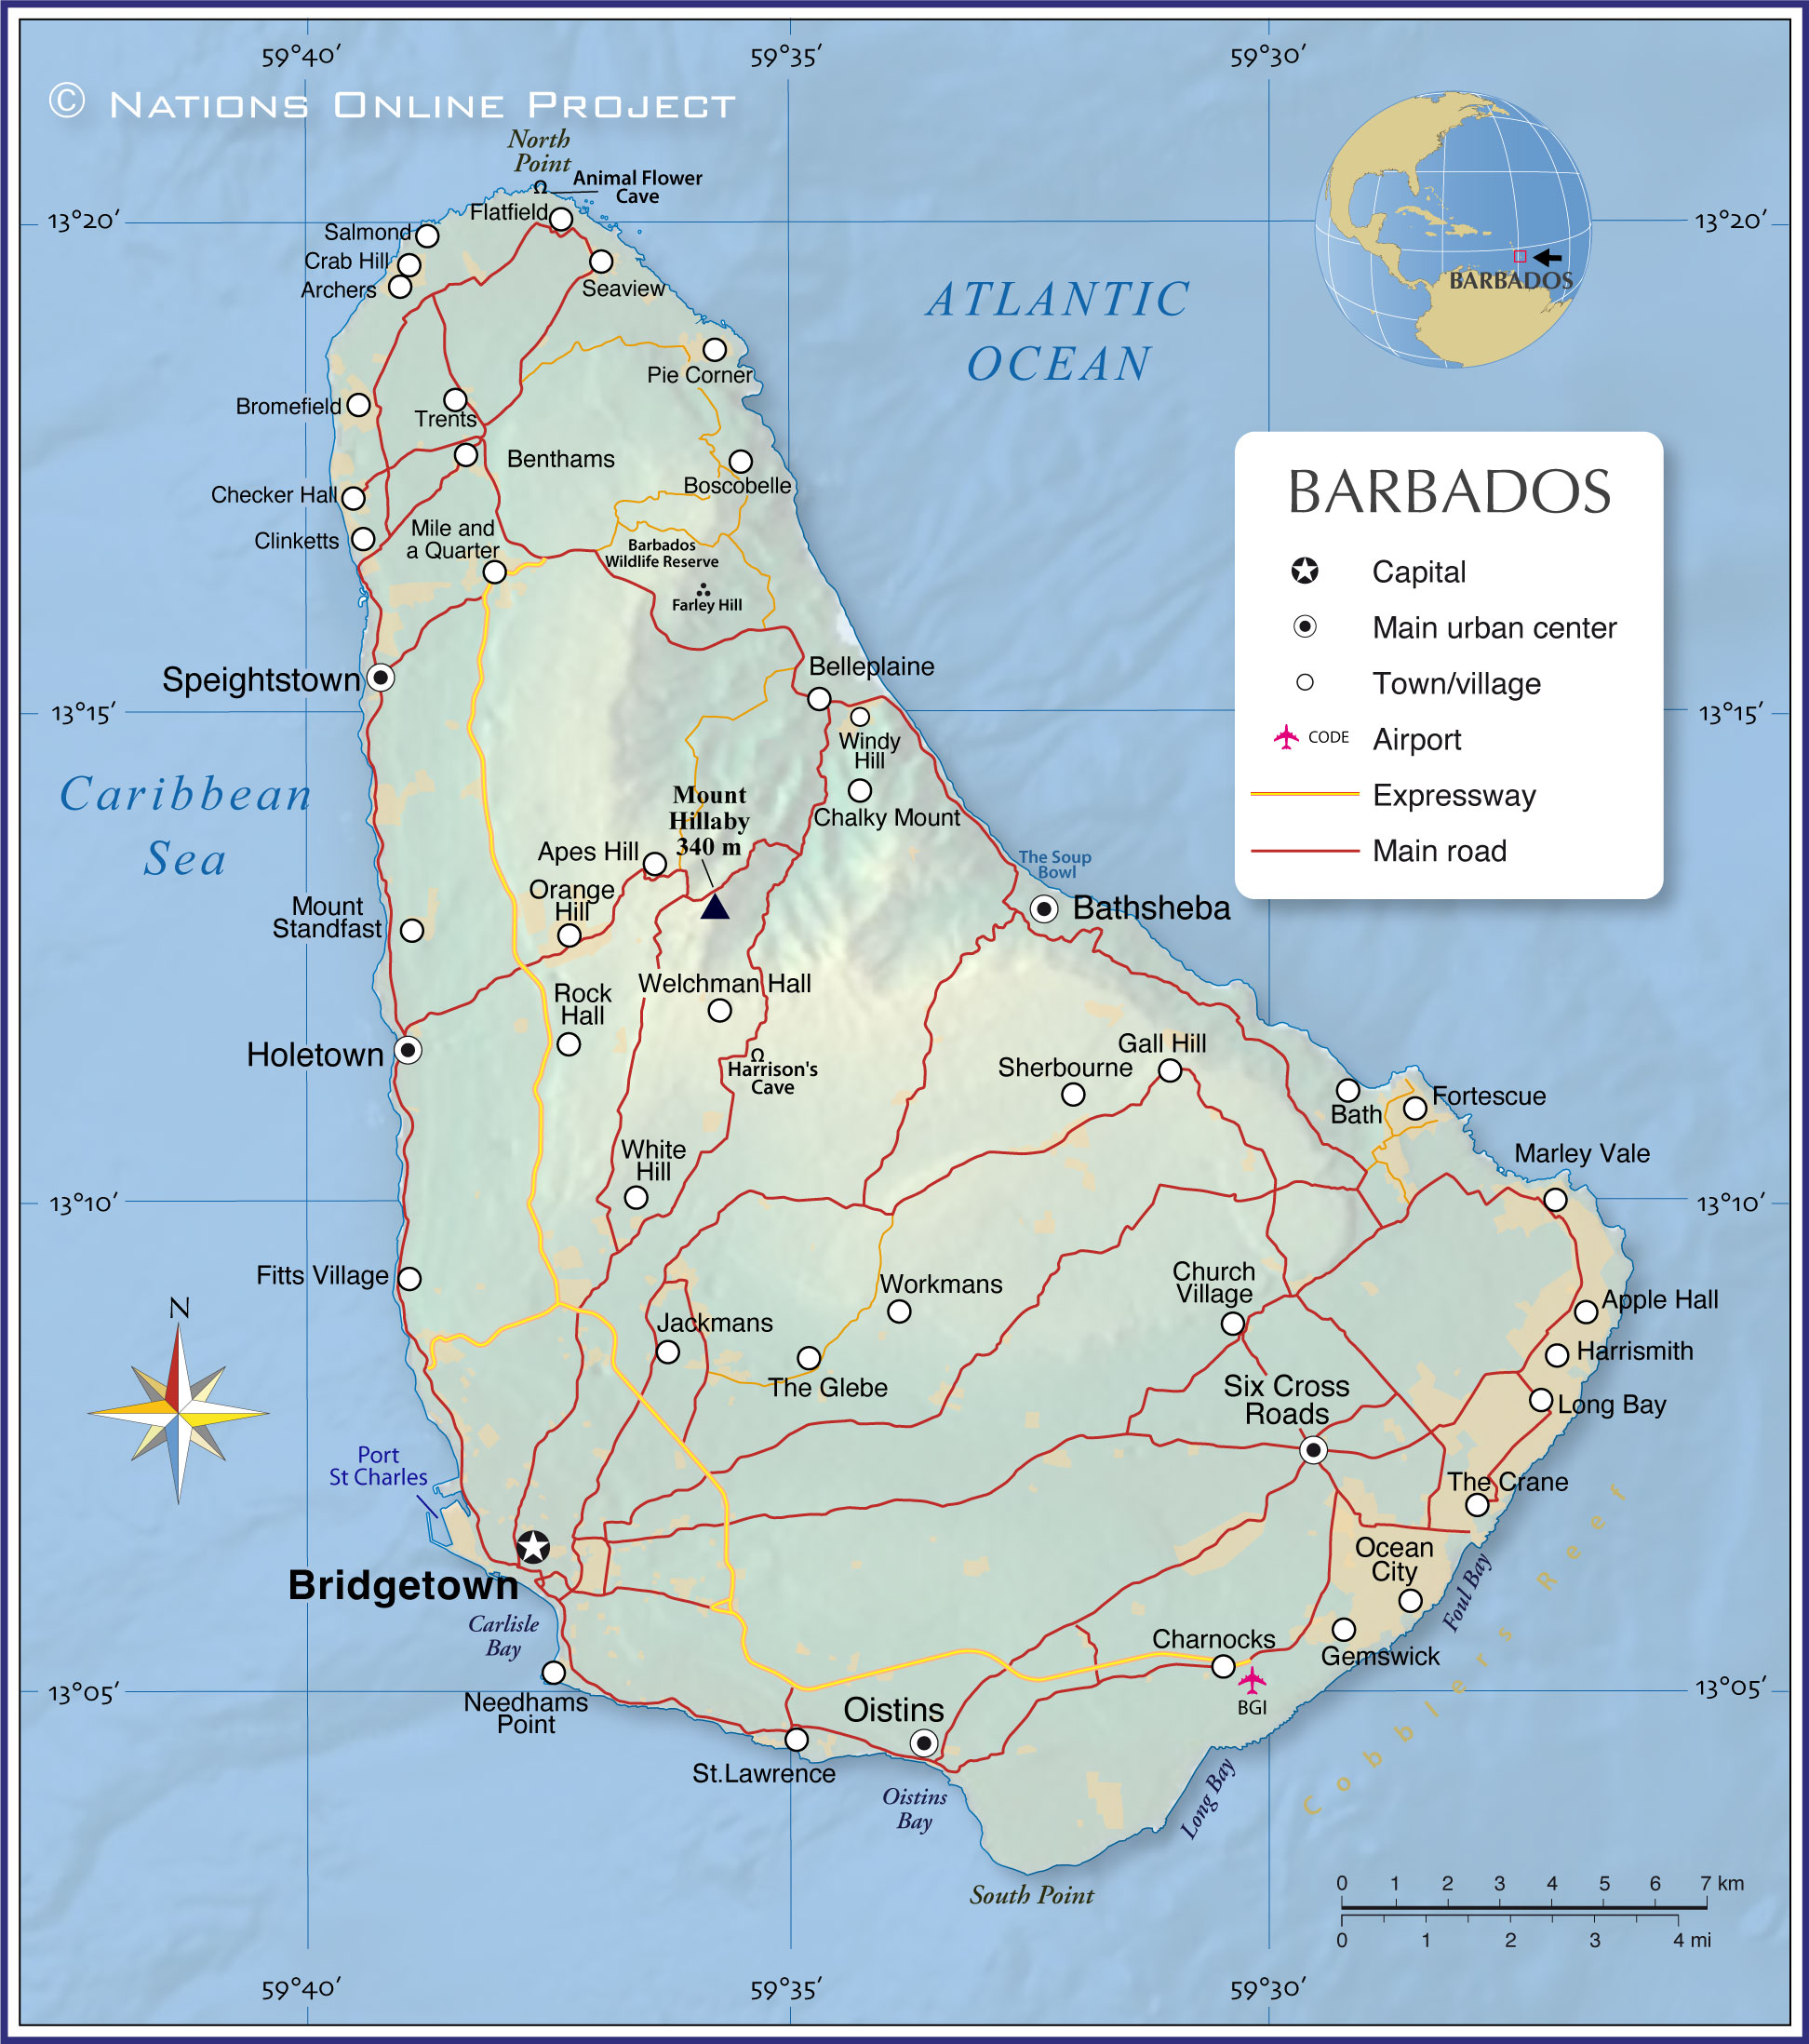 Political Map of Barbados - Nations Online Project